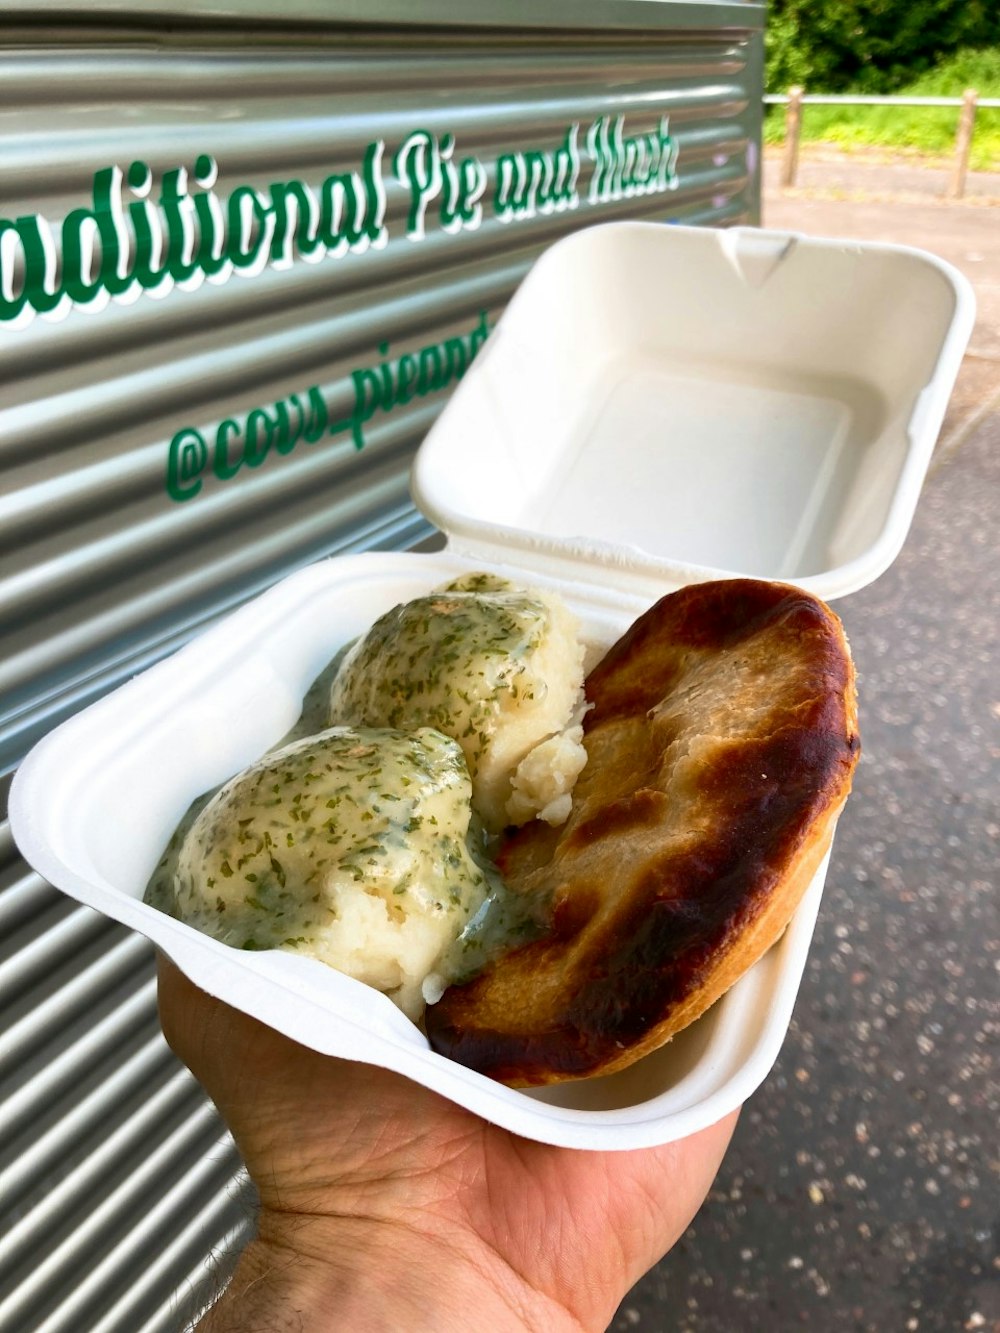 Hero image for supplier Covs Pie And Mash